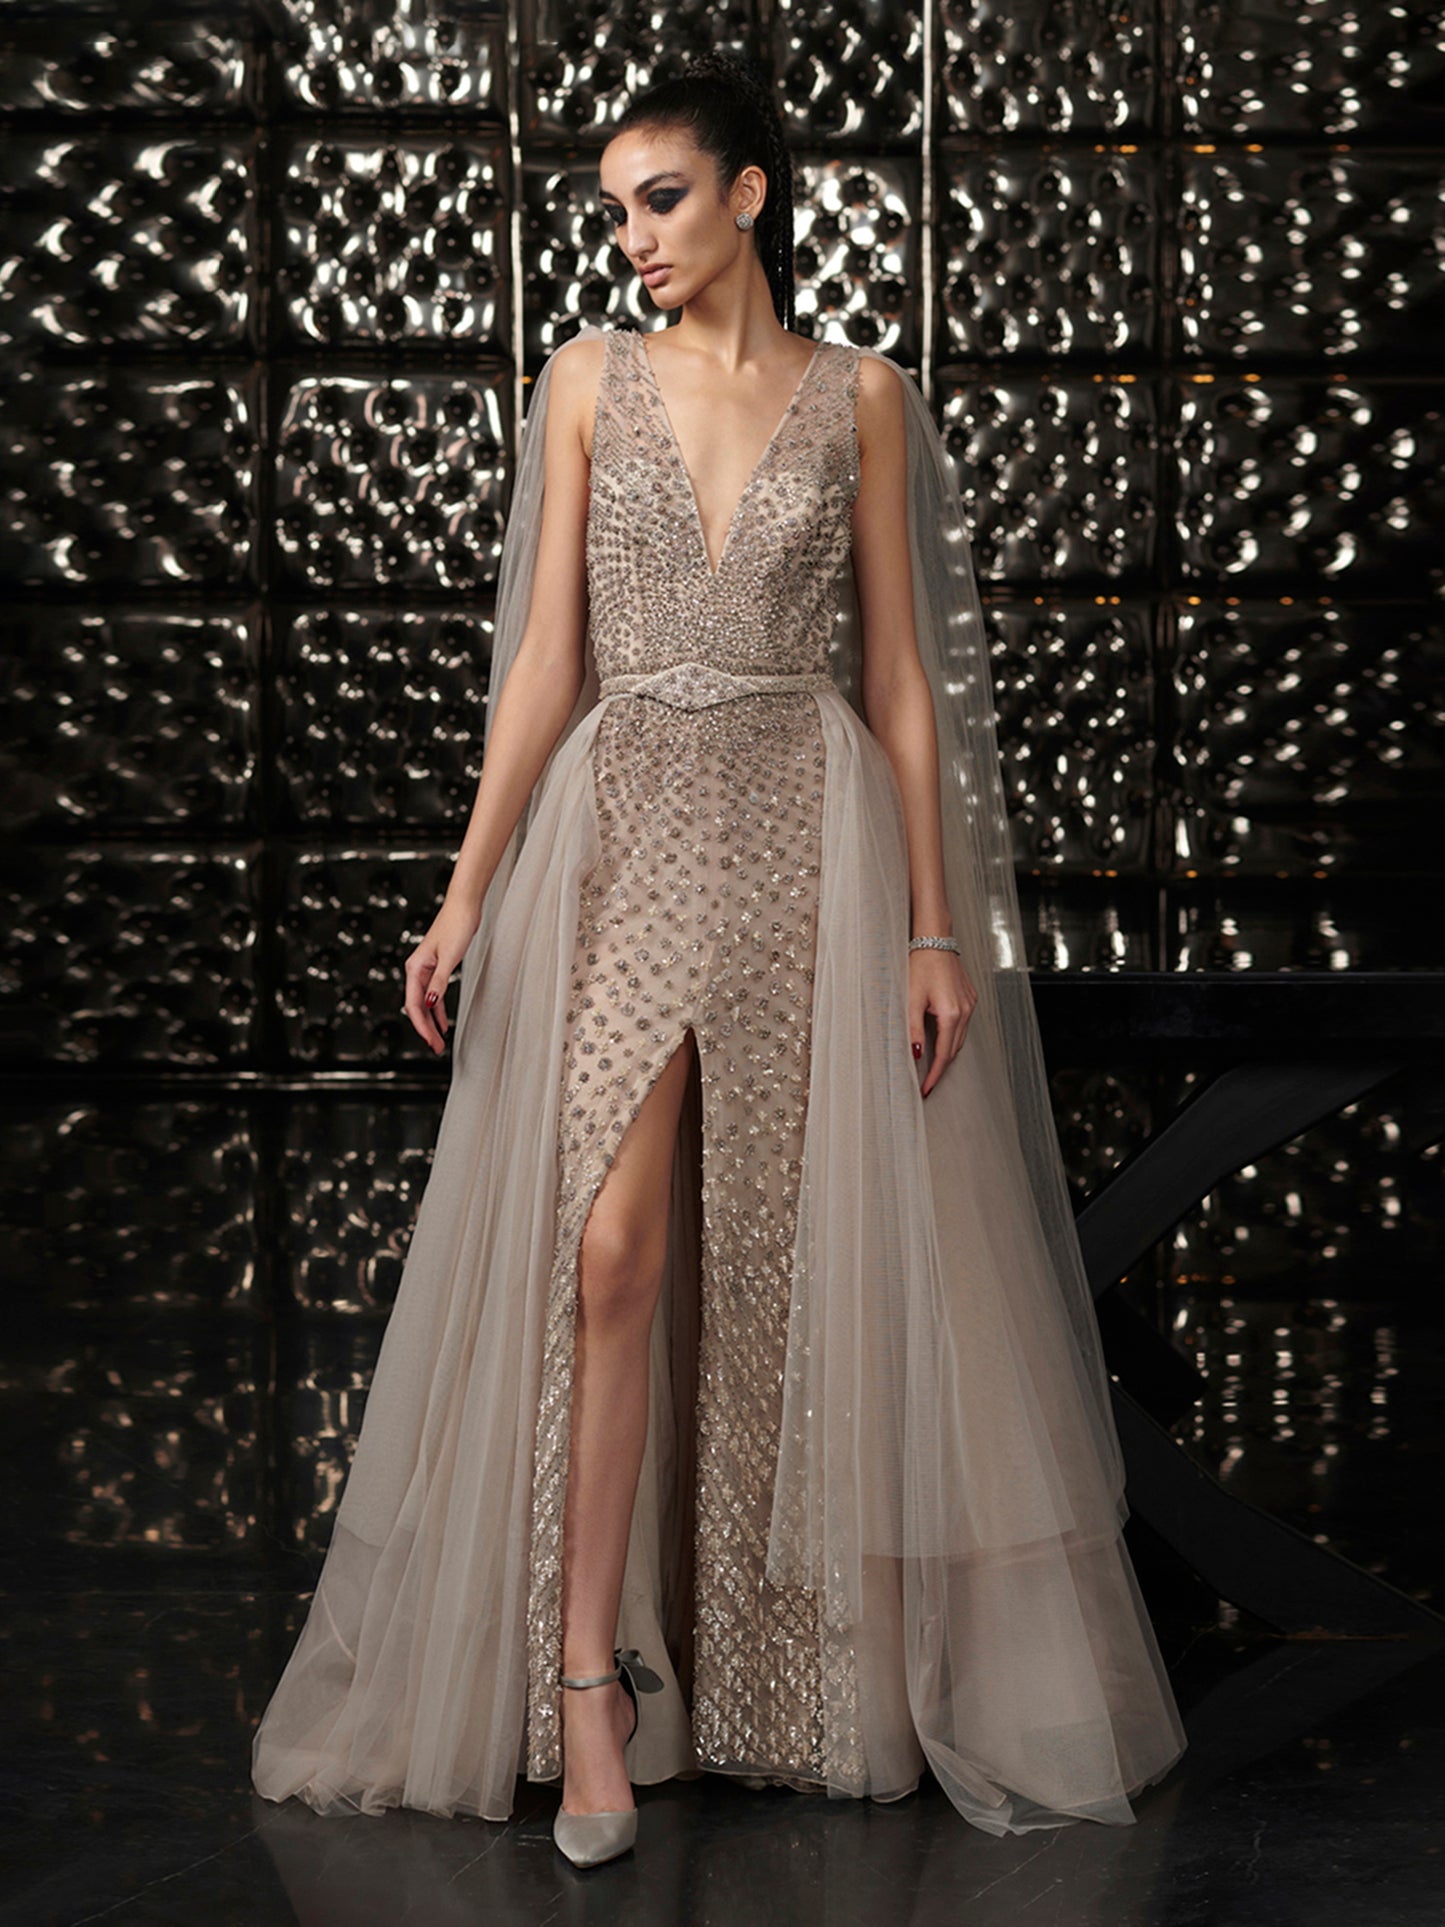 Maze Crystal Gown